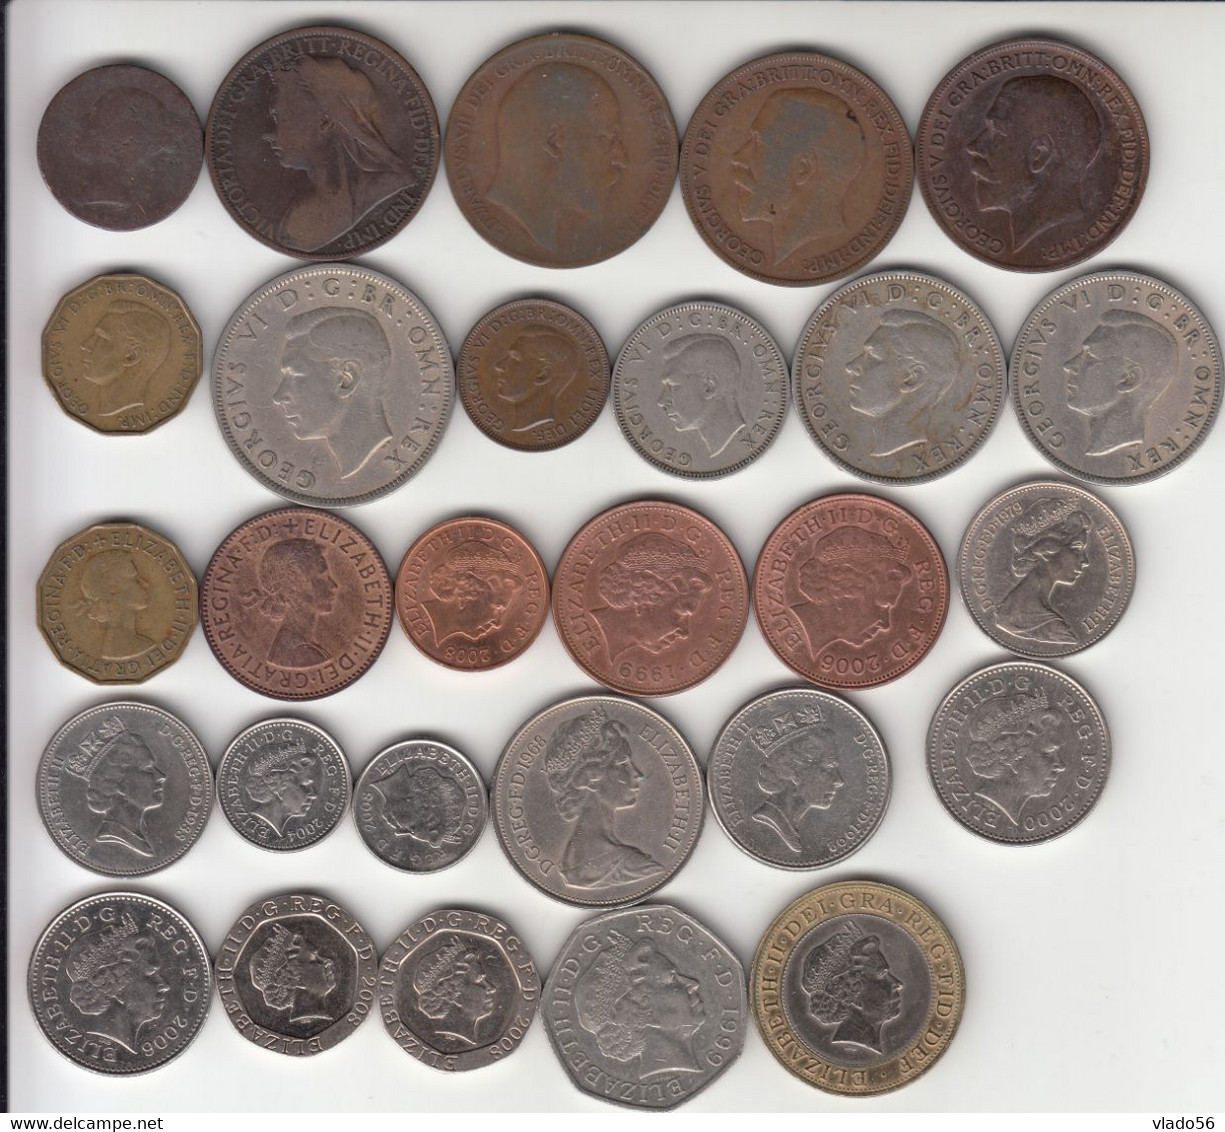 GREAT BRITAIN  - LOT 27 DIFFERENT COINS FROM  1 FARTHING 1847 UP TO  2 POUNDS 2008 ,  LM1.23 - Collections